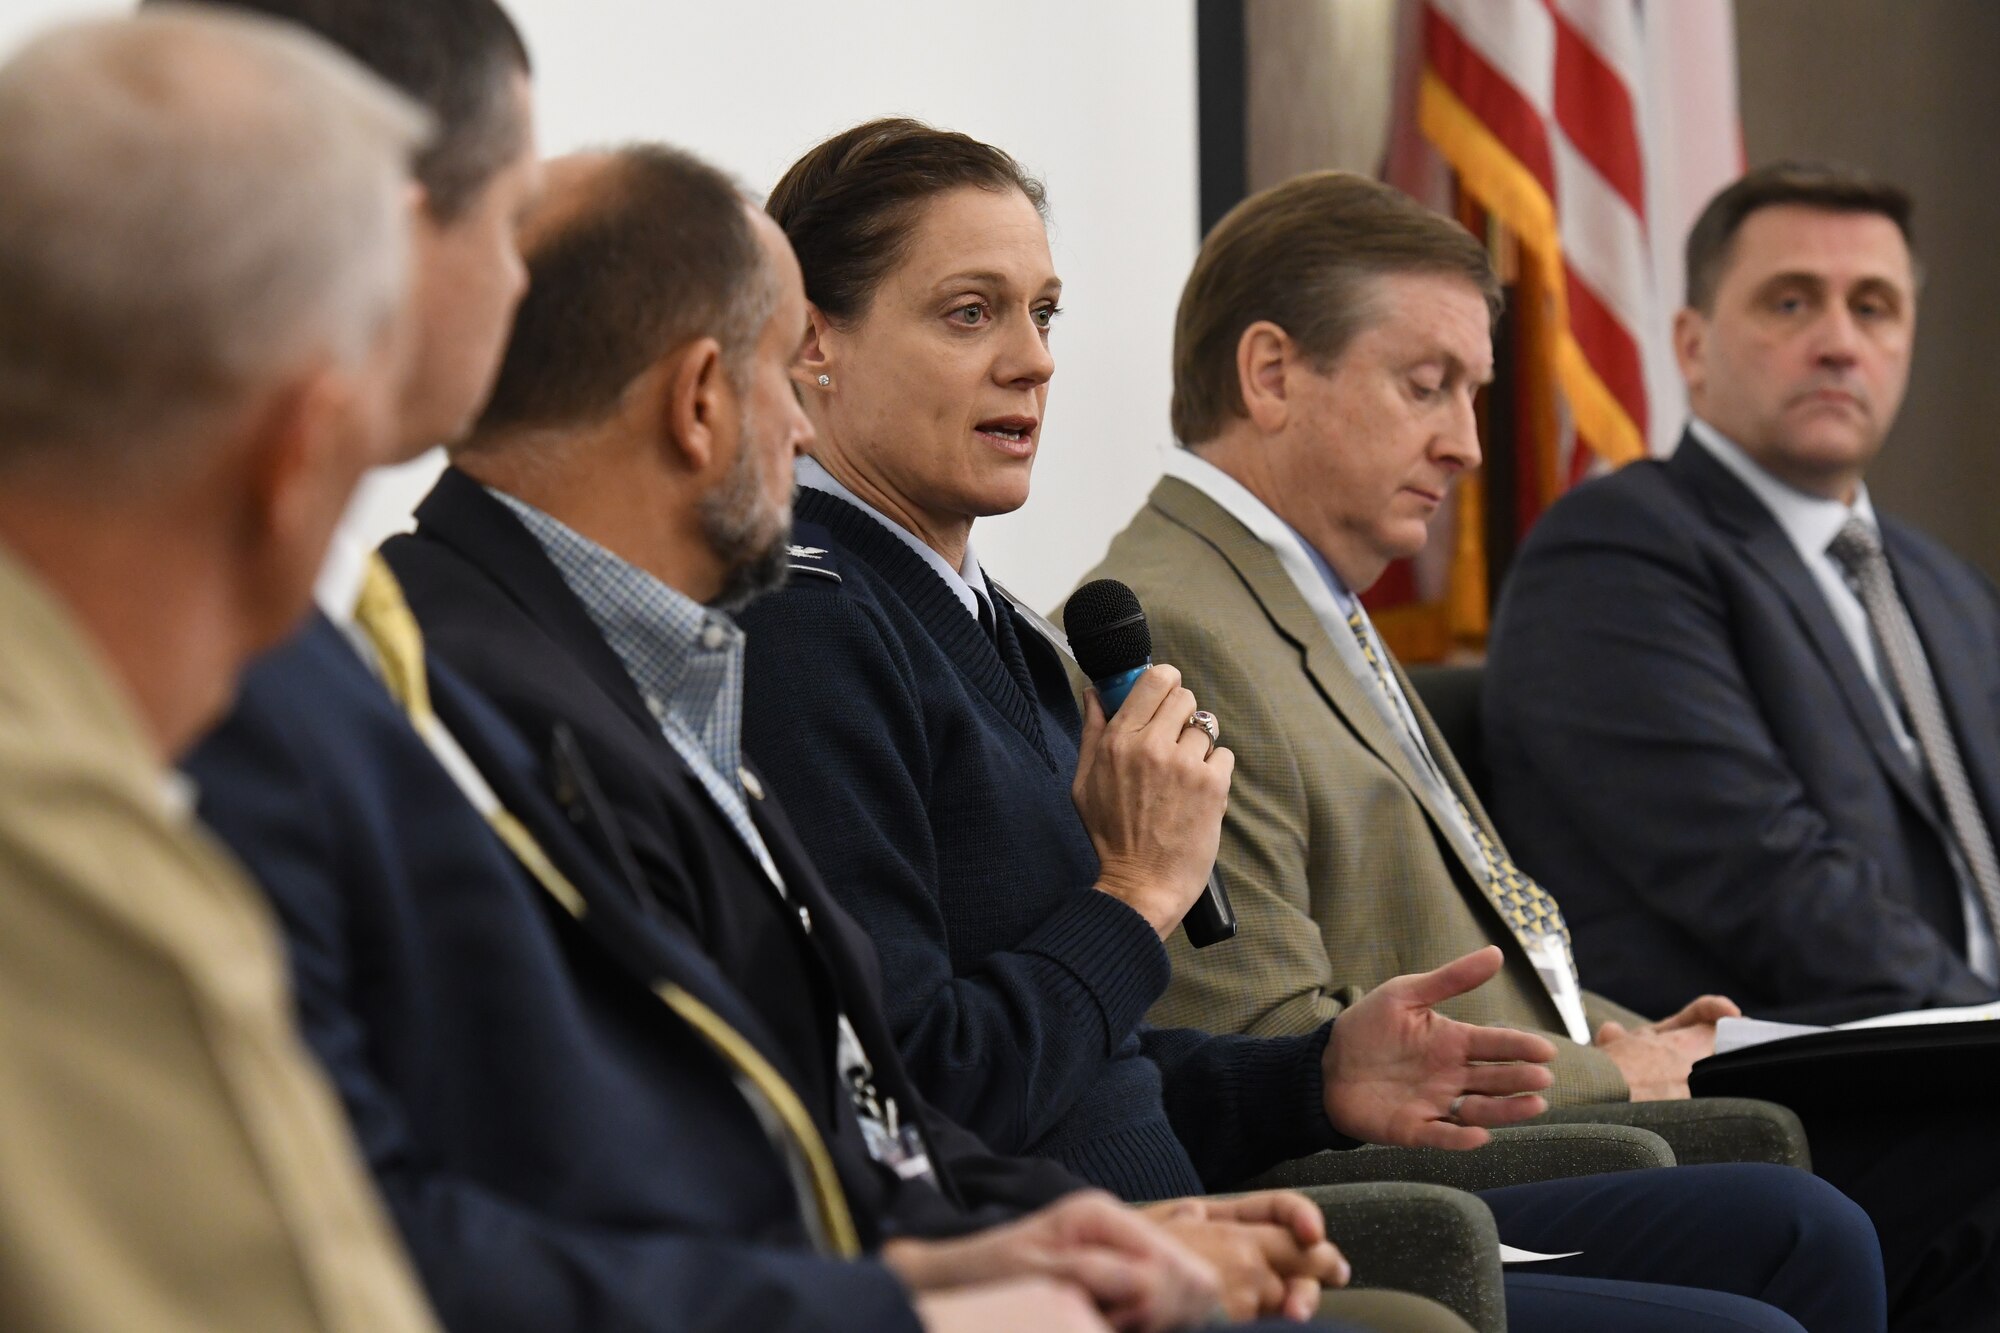 U.S. Air Force Col. Marcia Quigley, 81st Mission Support Group commander, participates in a panel discussion during the Mississippi Gulf Coast Defense Forum inside the Courtyard by Marriott Gulfport Beachfront in Gulfport, Mississippi, Dec. 3, 2018. The two-day event connected Defense Department leaders at the secretariat level with state leaders bringing key decision makers to the state to show its tremendous assets, facilitate communication between the installation commanders and their associated community leaders. (U.S. Air Force photo by Kemberly Groue)